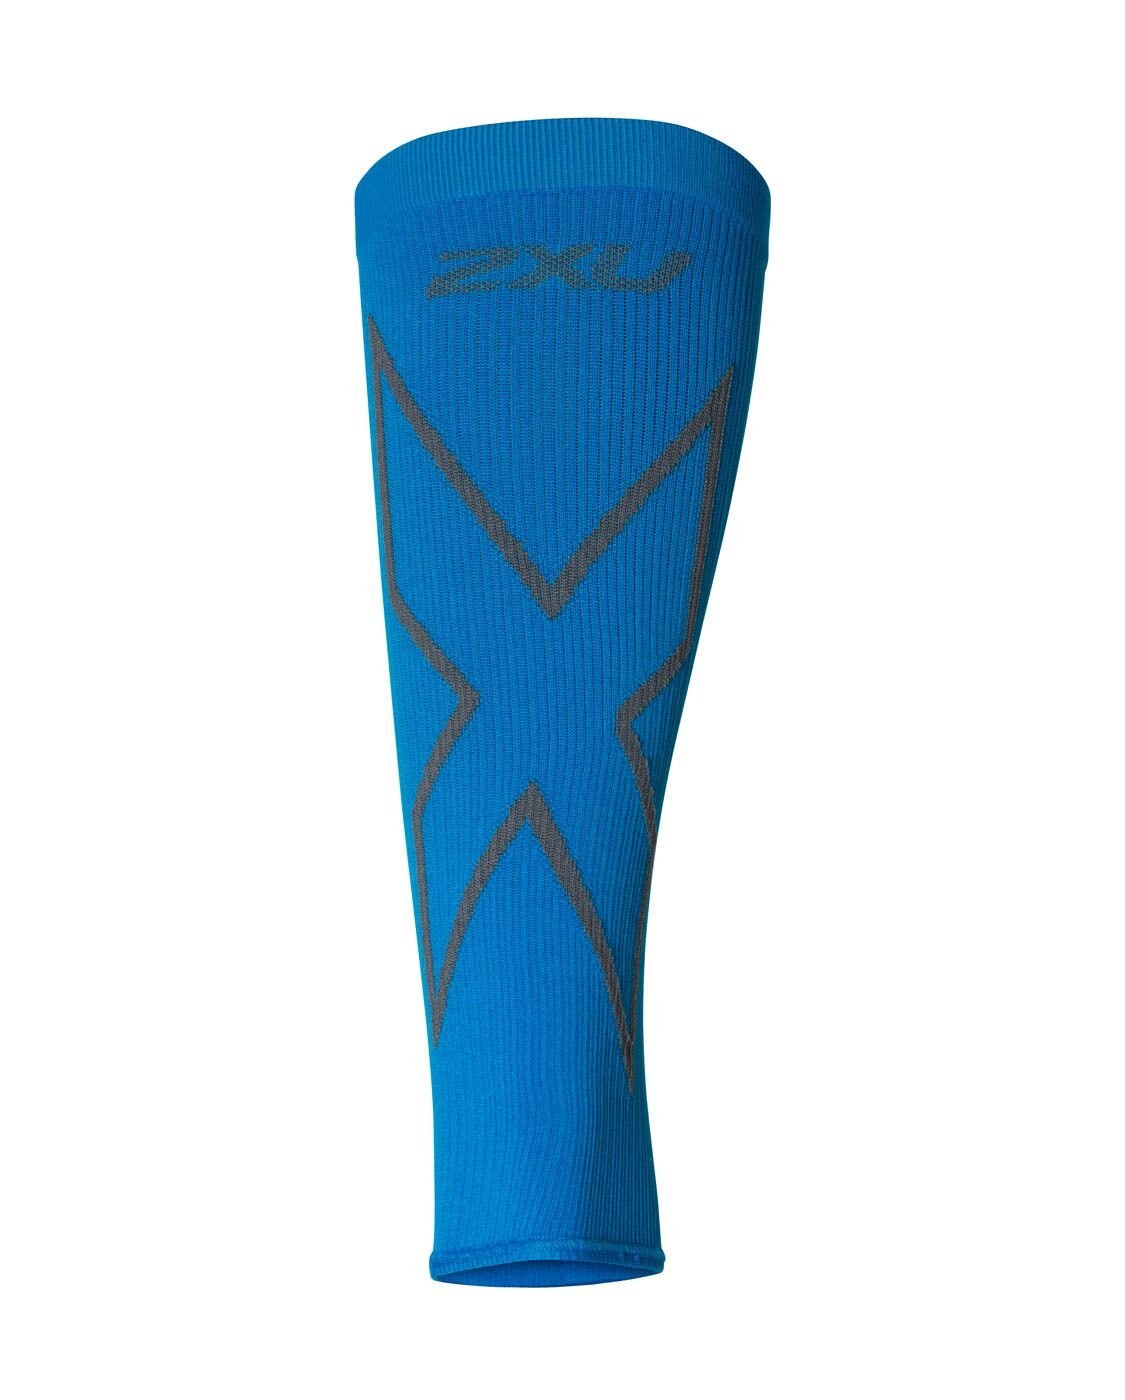 2XU South Africa - X Compression Calf Sleeves - Vibrant Blue/Grey